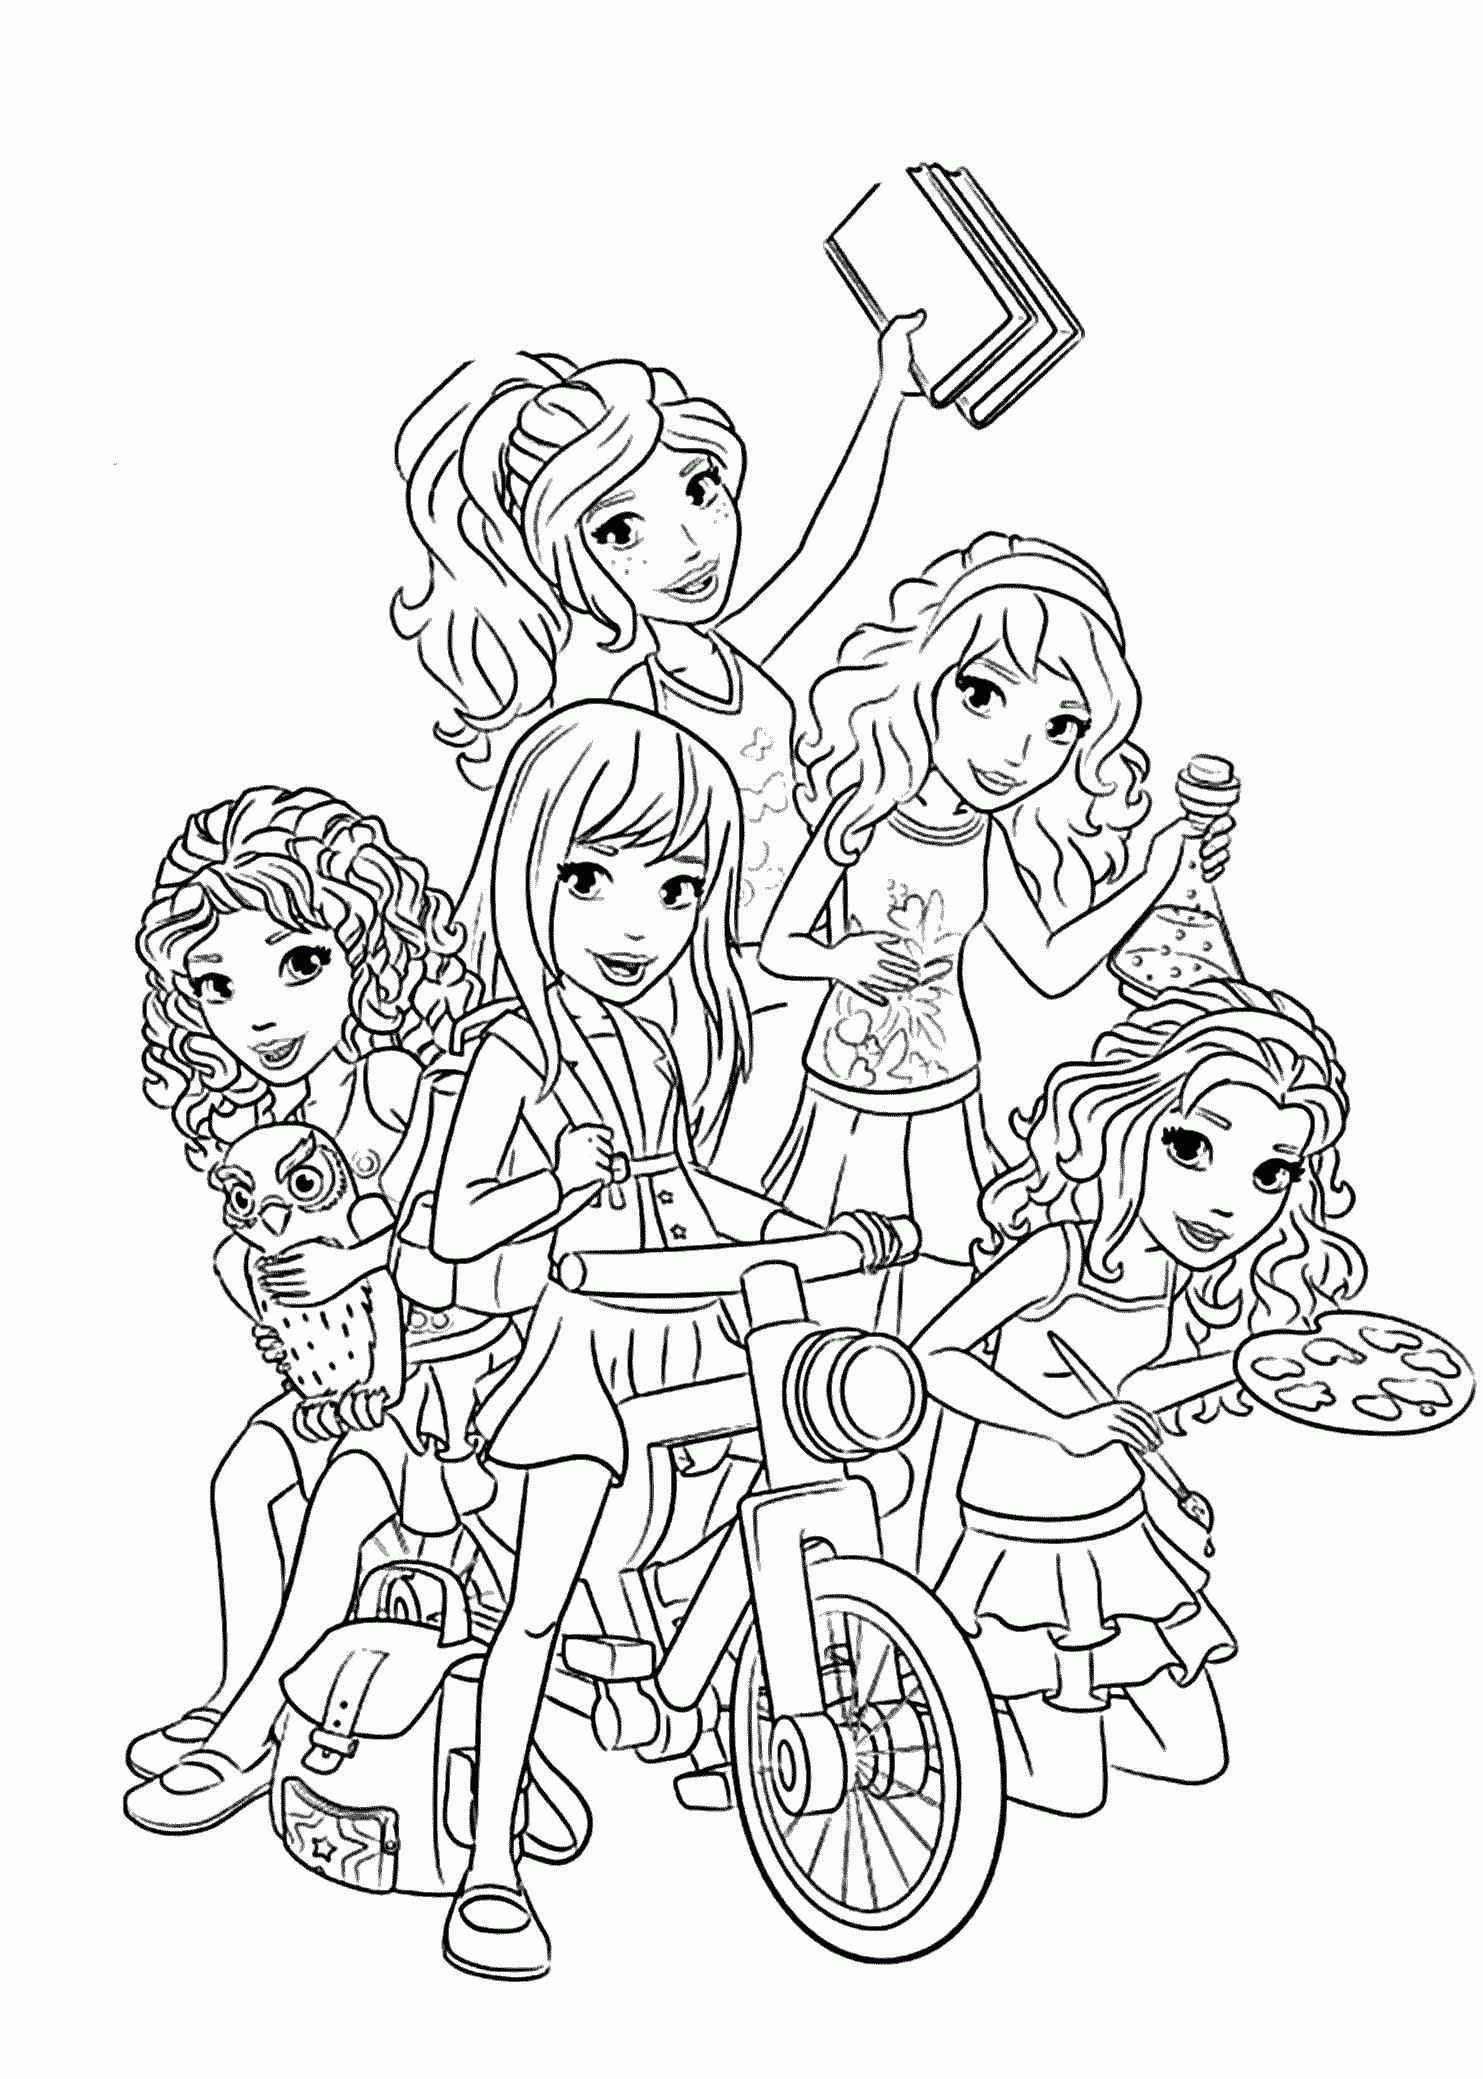 Lego Friends All Coloring Page For Kids, Printable Free. Lego - Free Printable Lego Friends Coloring Pages